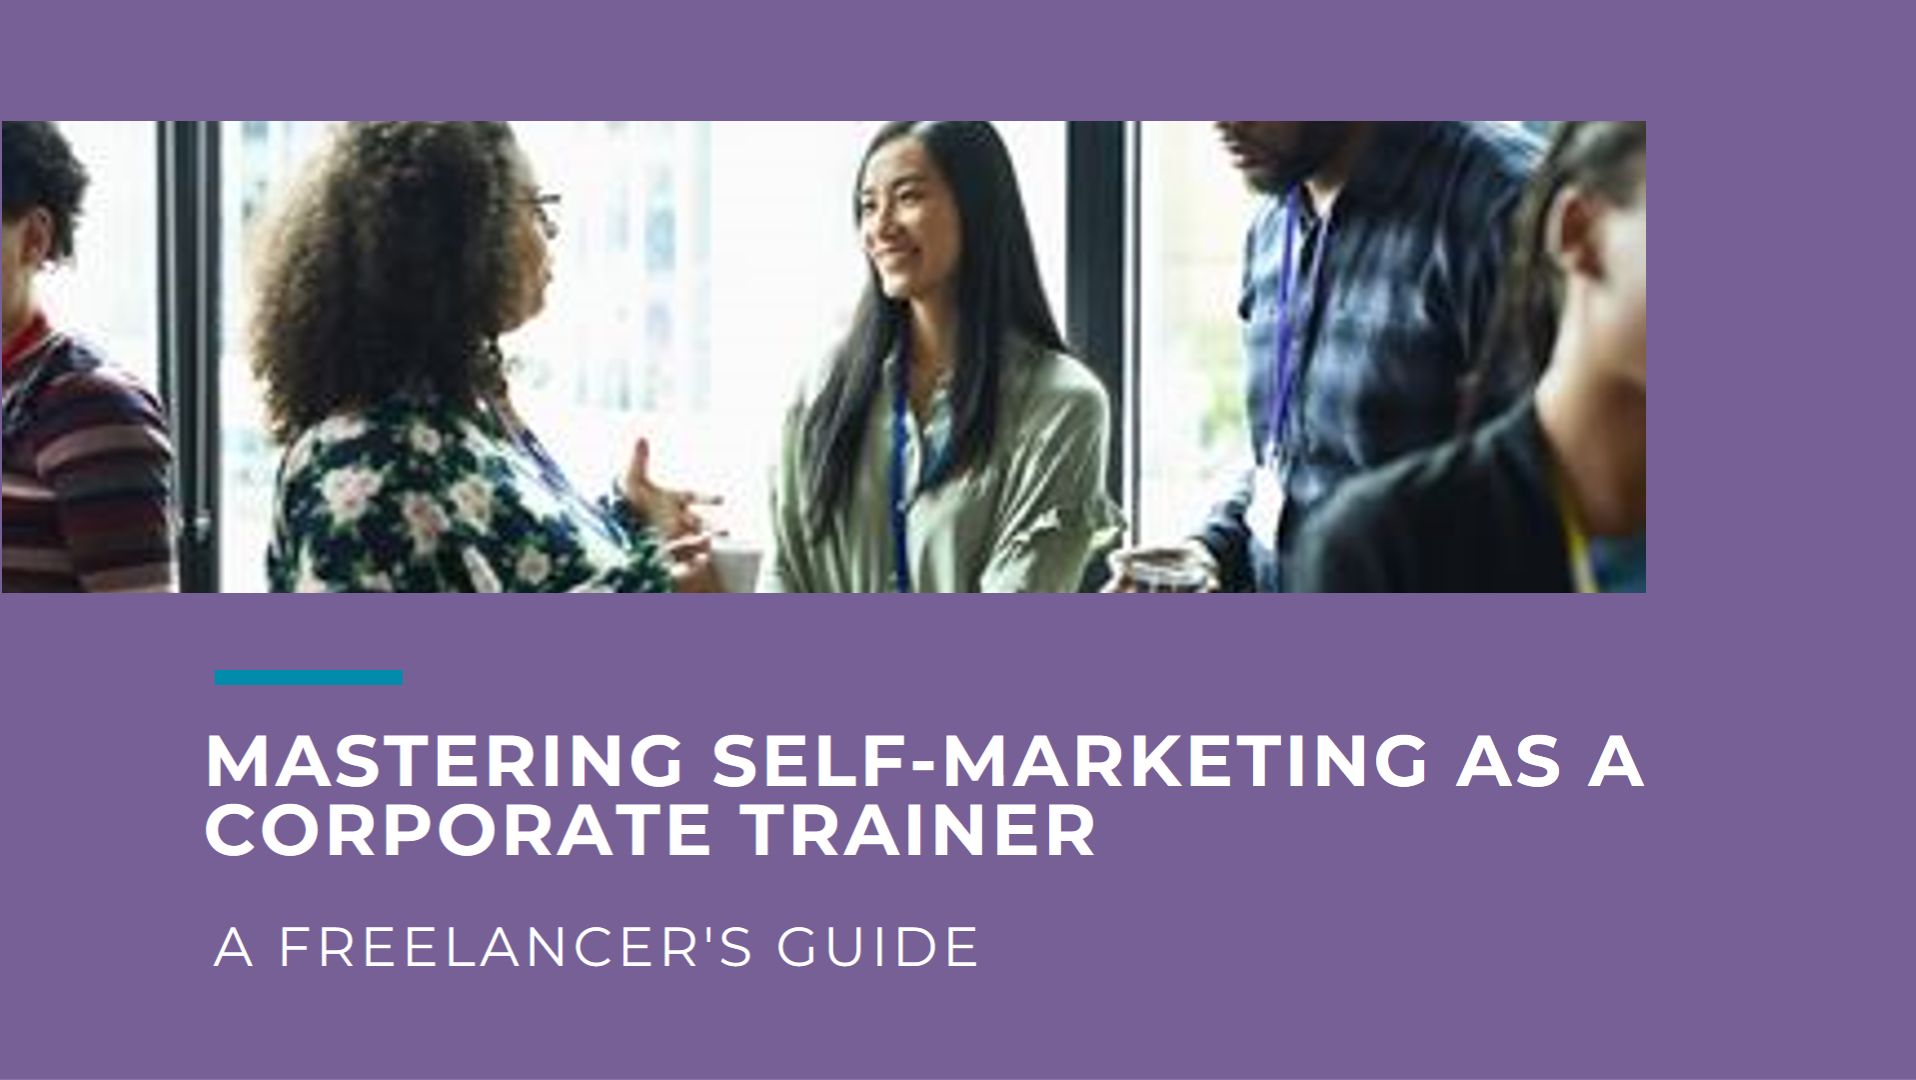 Mastering the Art of Self-Marketing A Guide for Freelance Corporate Trainers